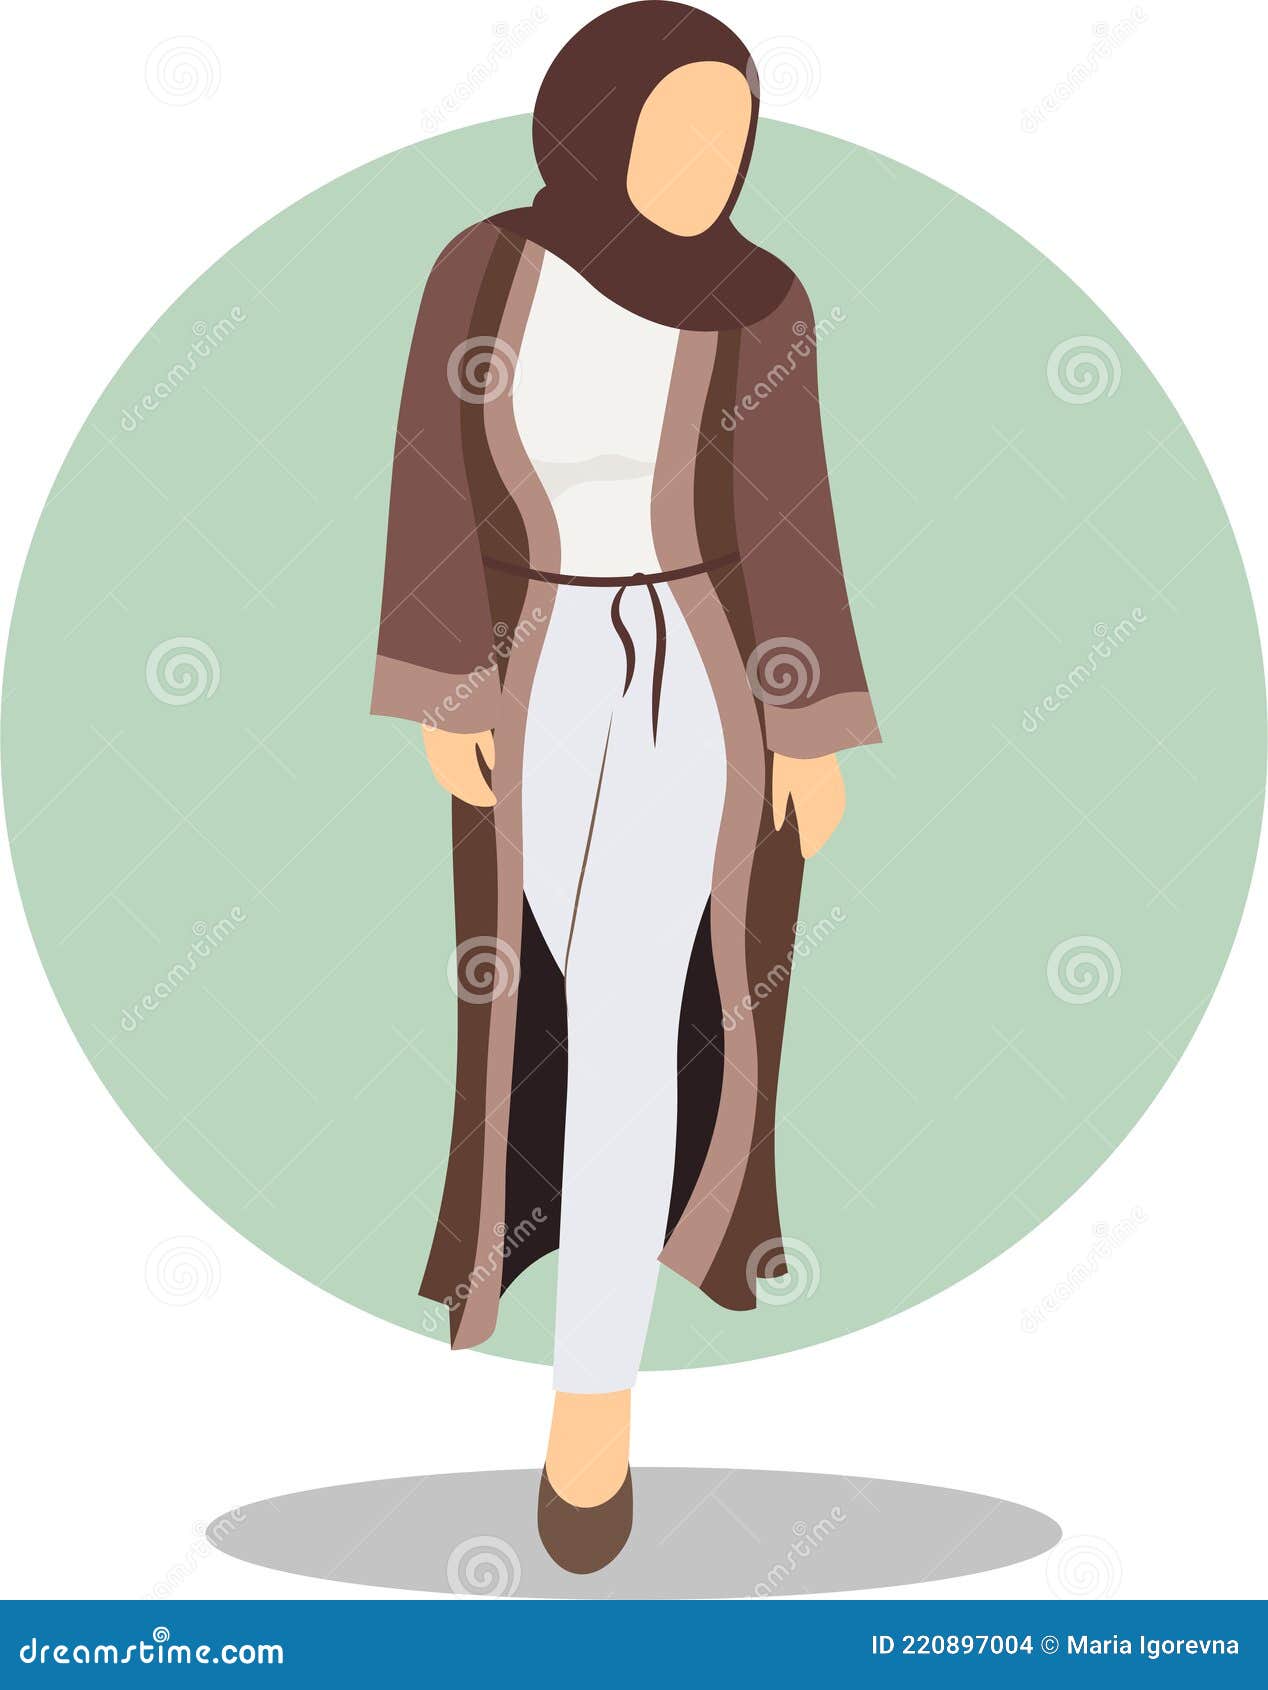 Oriental girl stock photo. Image of clothing, crown, bright - 73572074